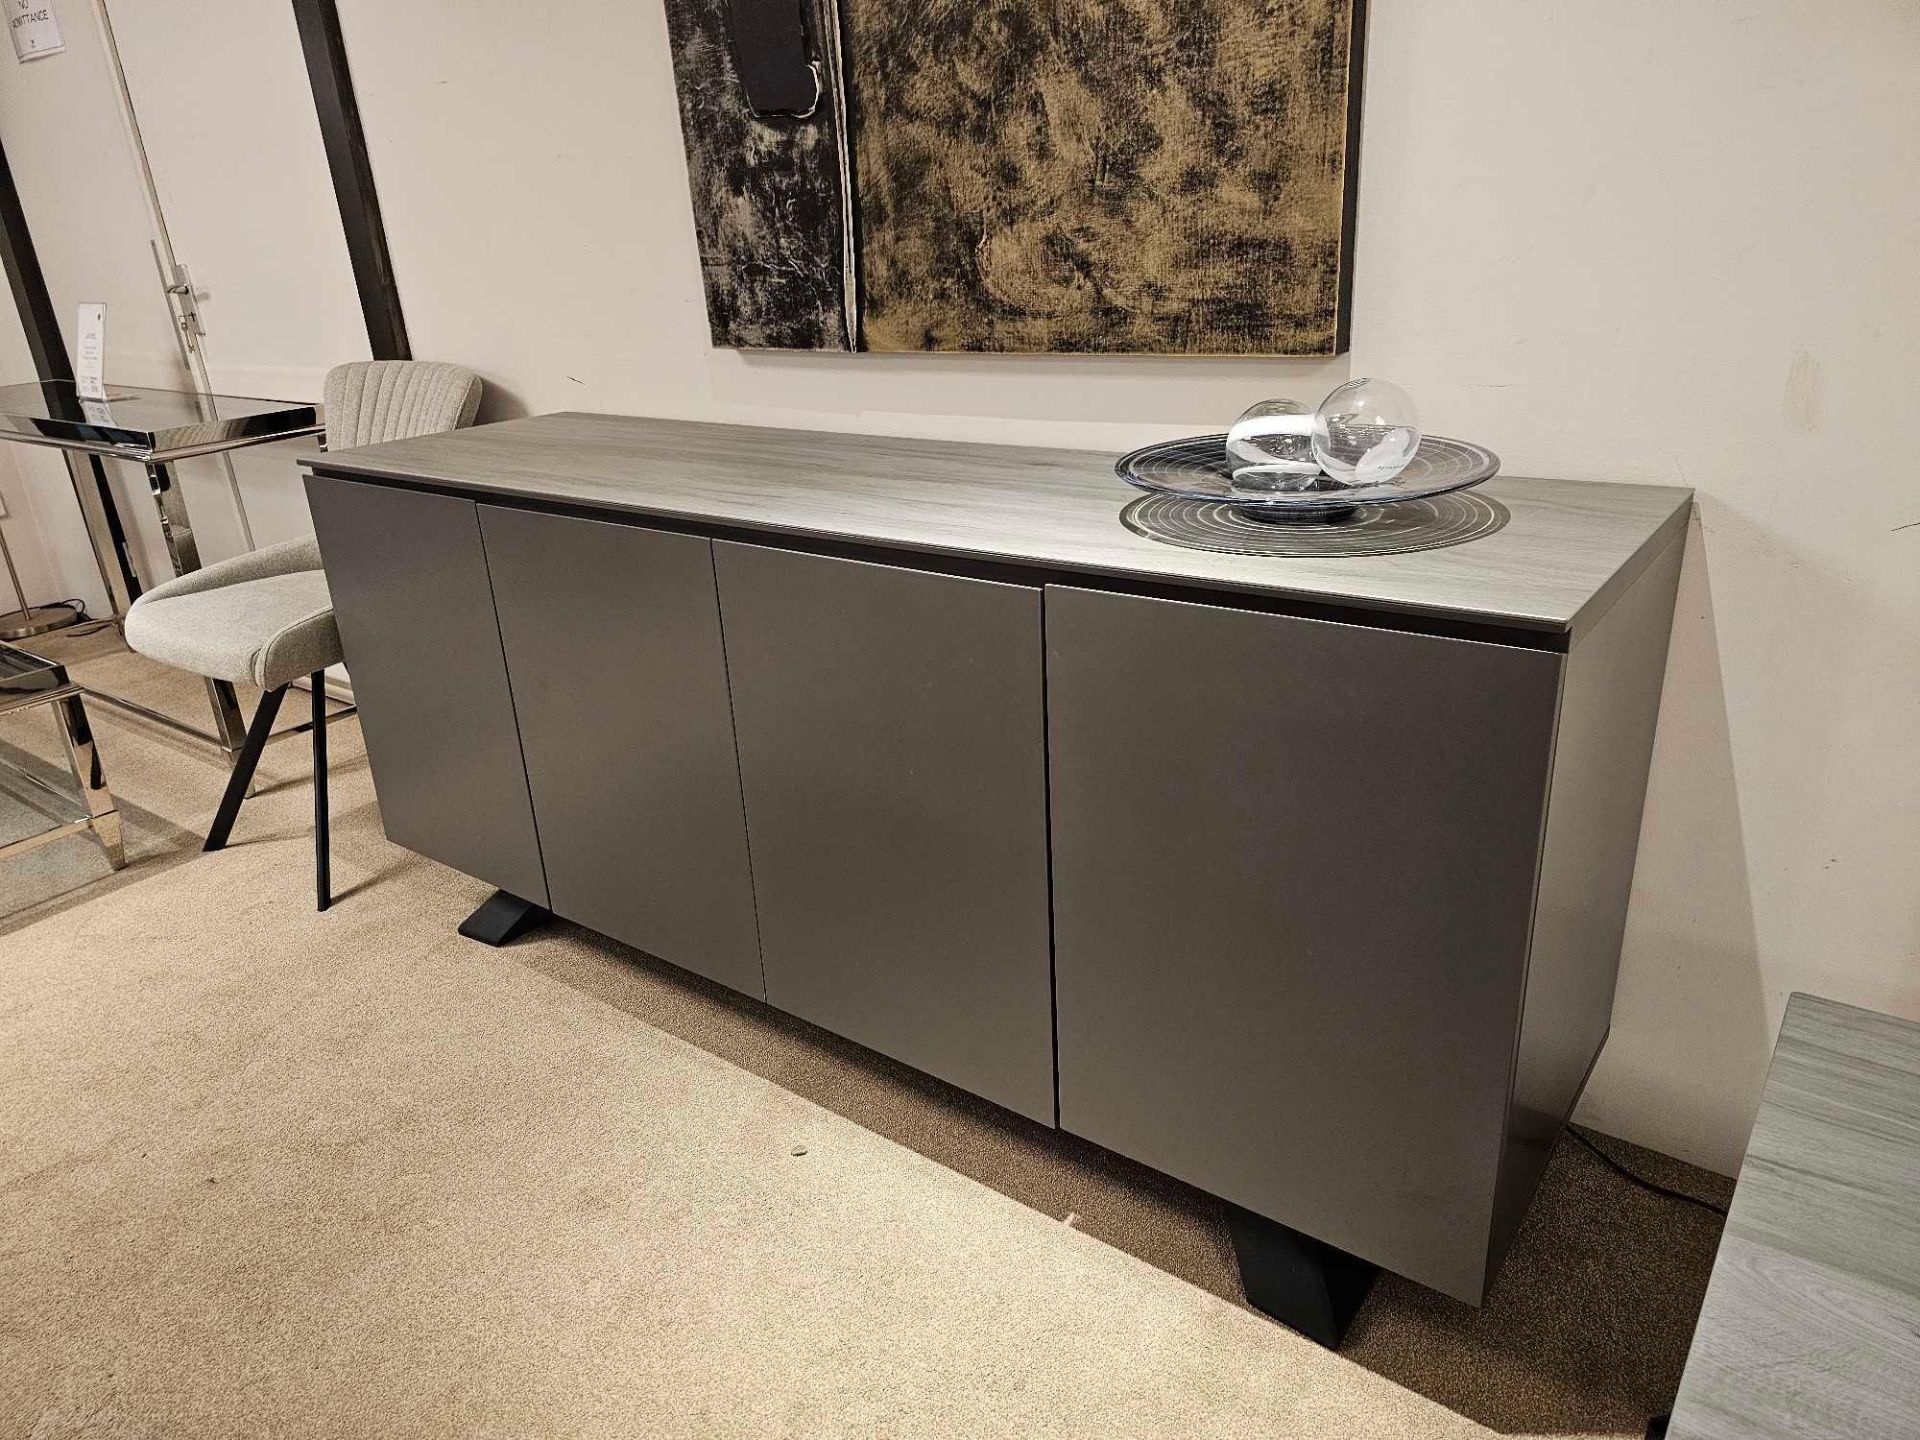 Spartan Sideboard by Kesterport The Spartan Four Door Sideboard provides is striking as a stand - Image 4 of 12